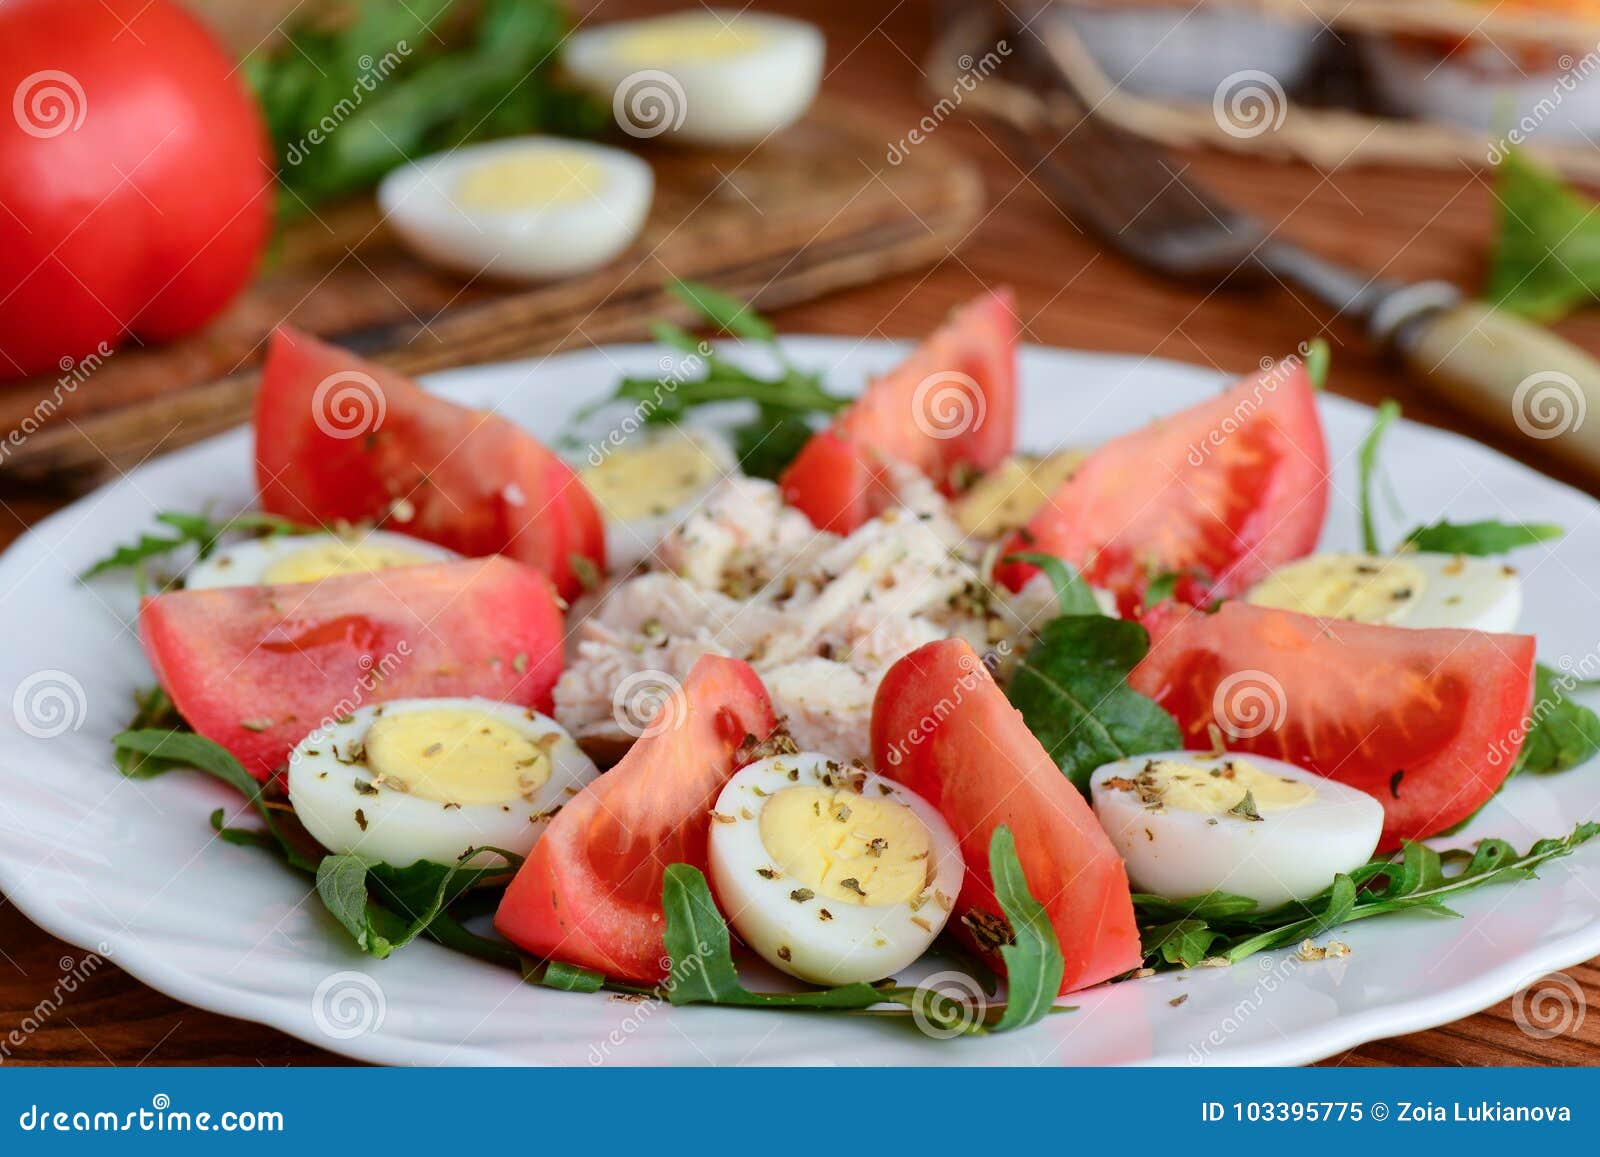 Light Vegetable Chicken Salad Idea For Lunch Or Dinner Salad With Fresh Tomatoes Rocket Quail Eggs Chicken Fillet And Spices Stock Image Image Of Dressing Cherry 103395775